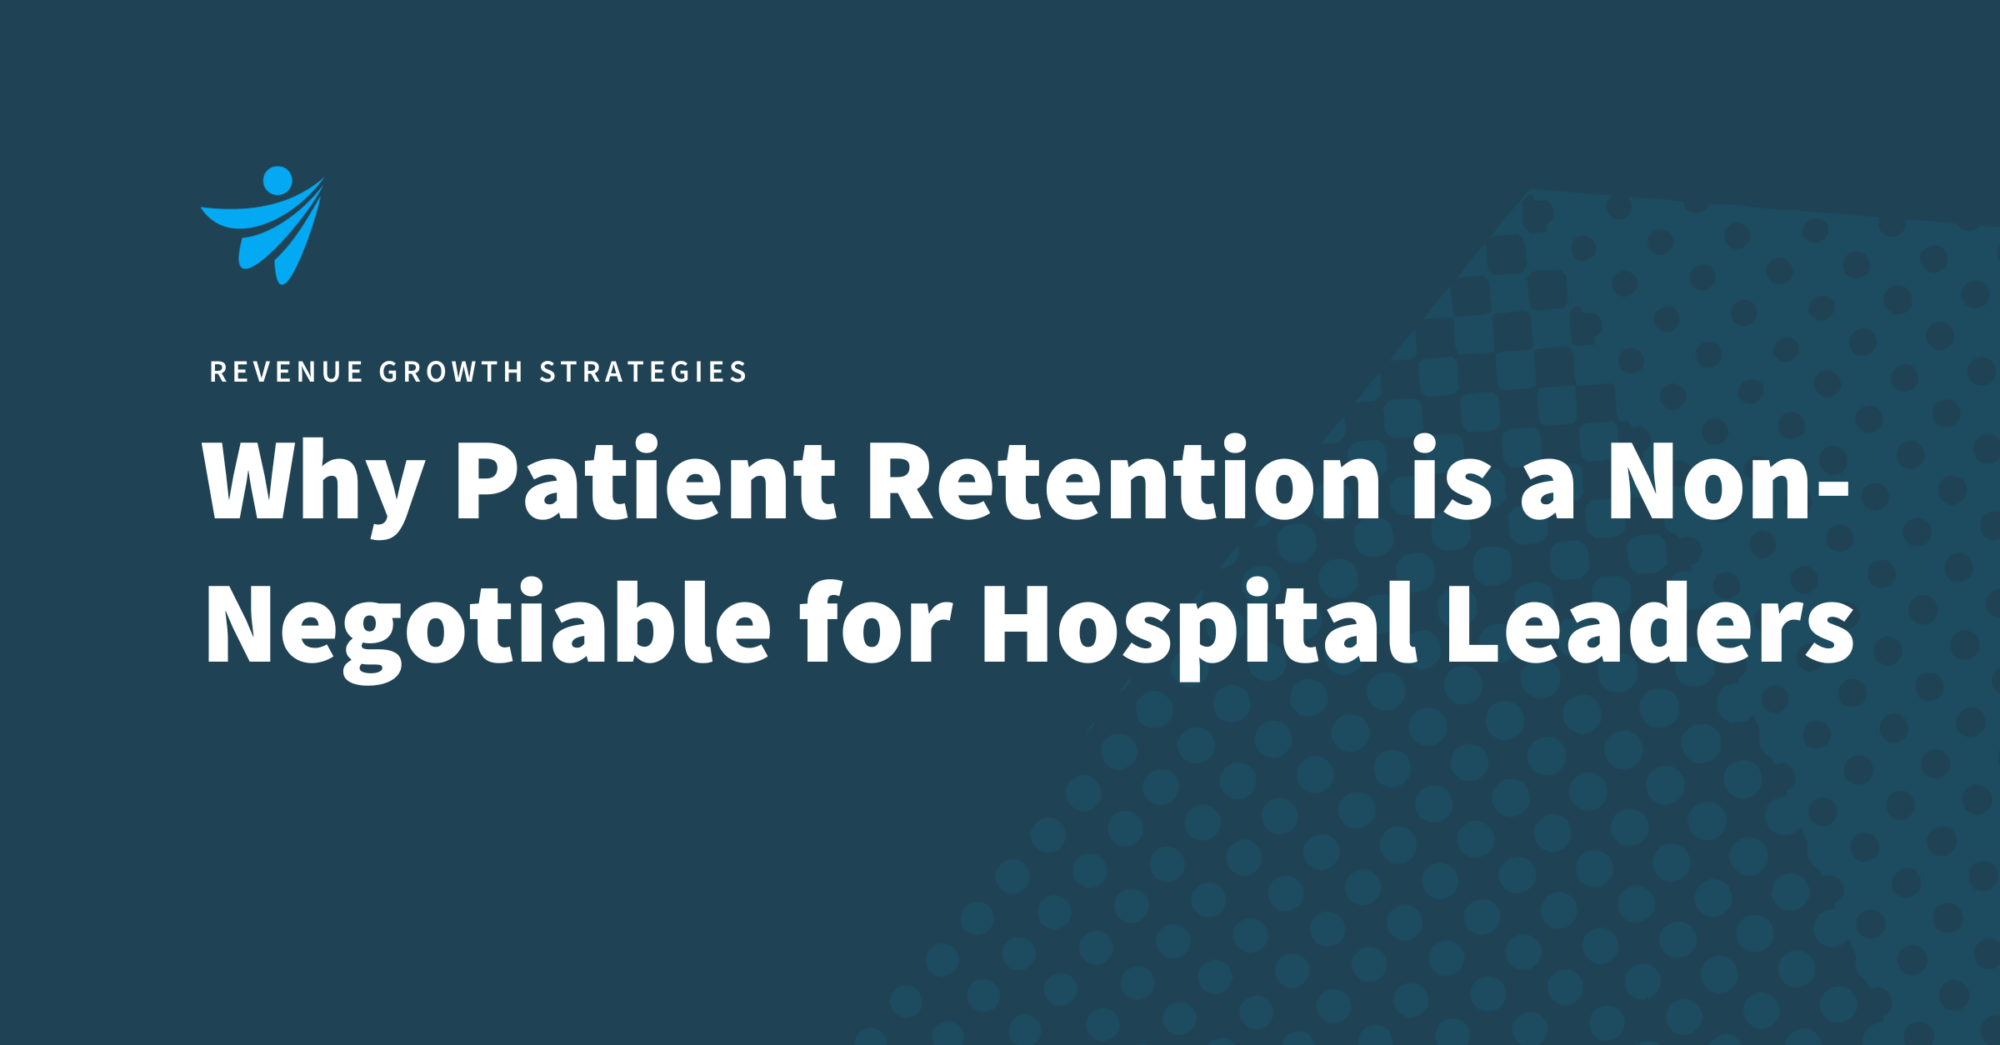 Thumbnail for Why Patient Retention is Non-Negotiable for Hospital Leaders